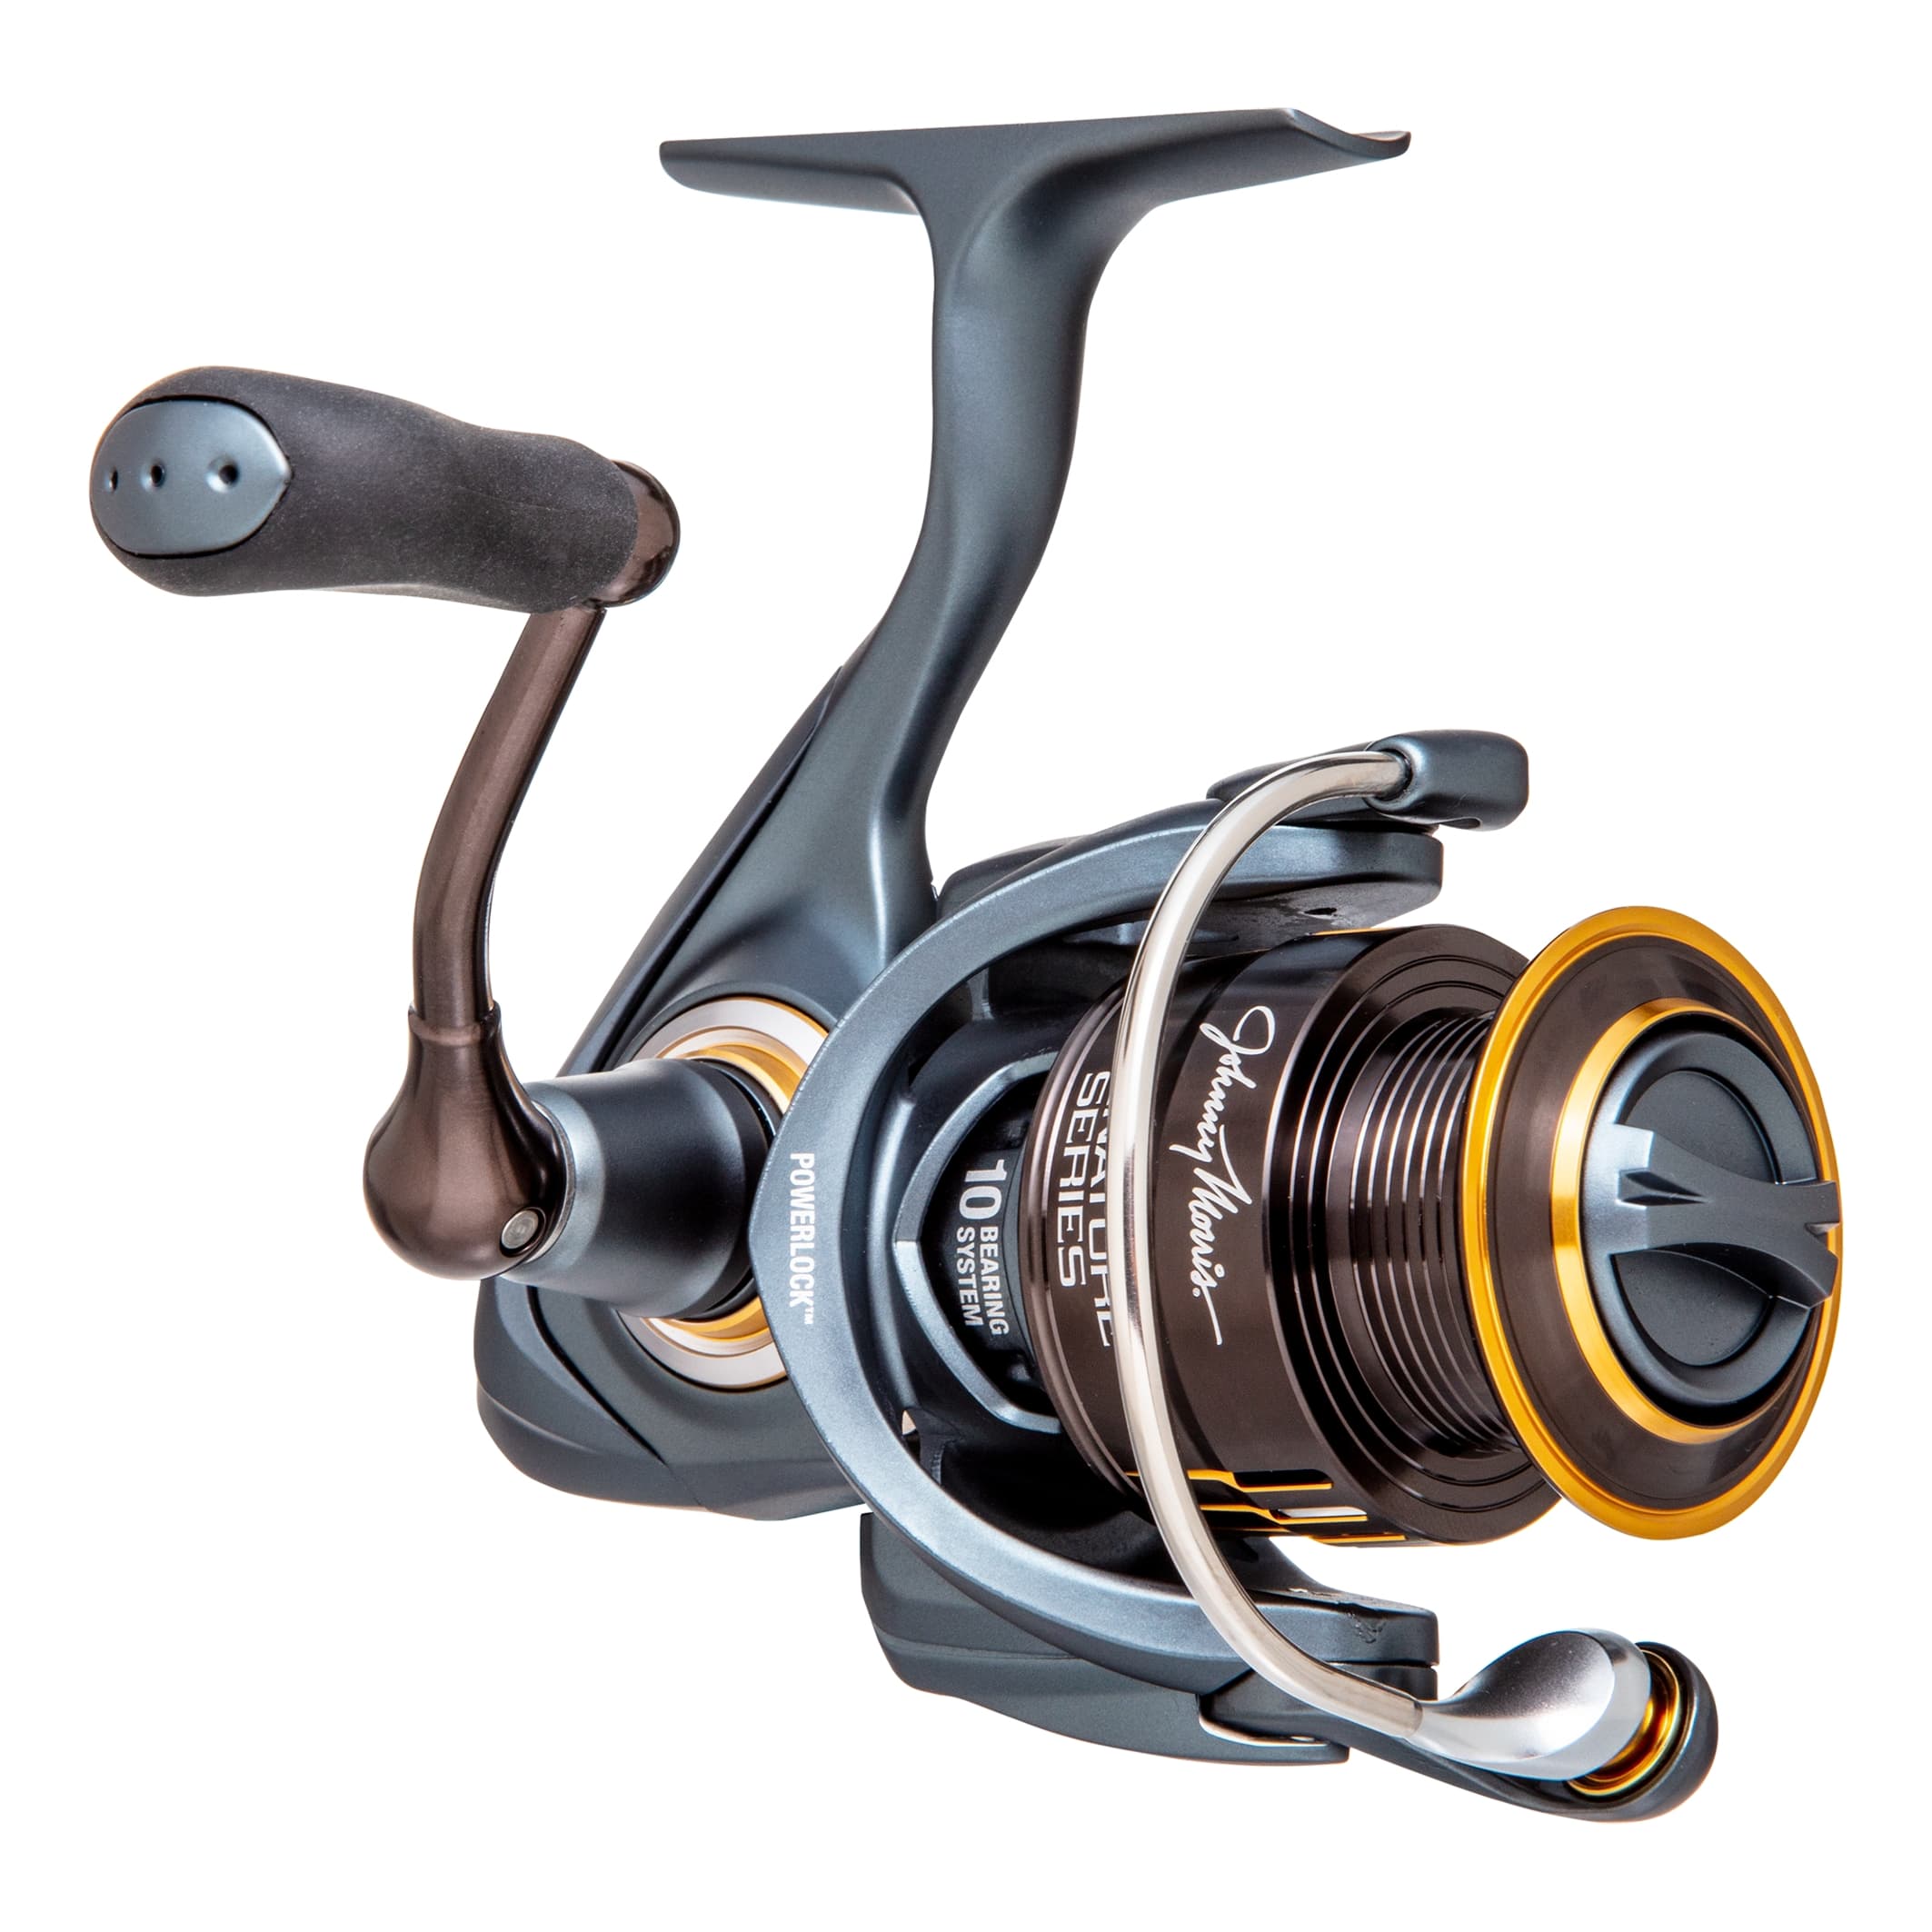 Bass Pro Shops Johnny Morris Signature Series Spinning Reel 